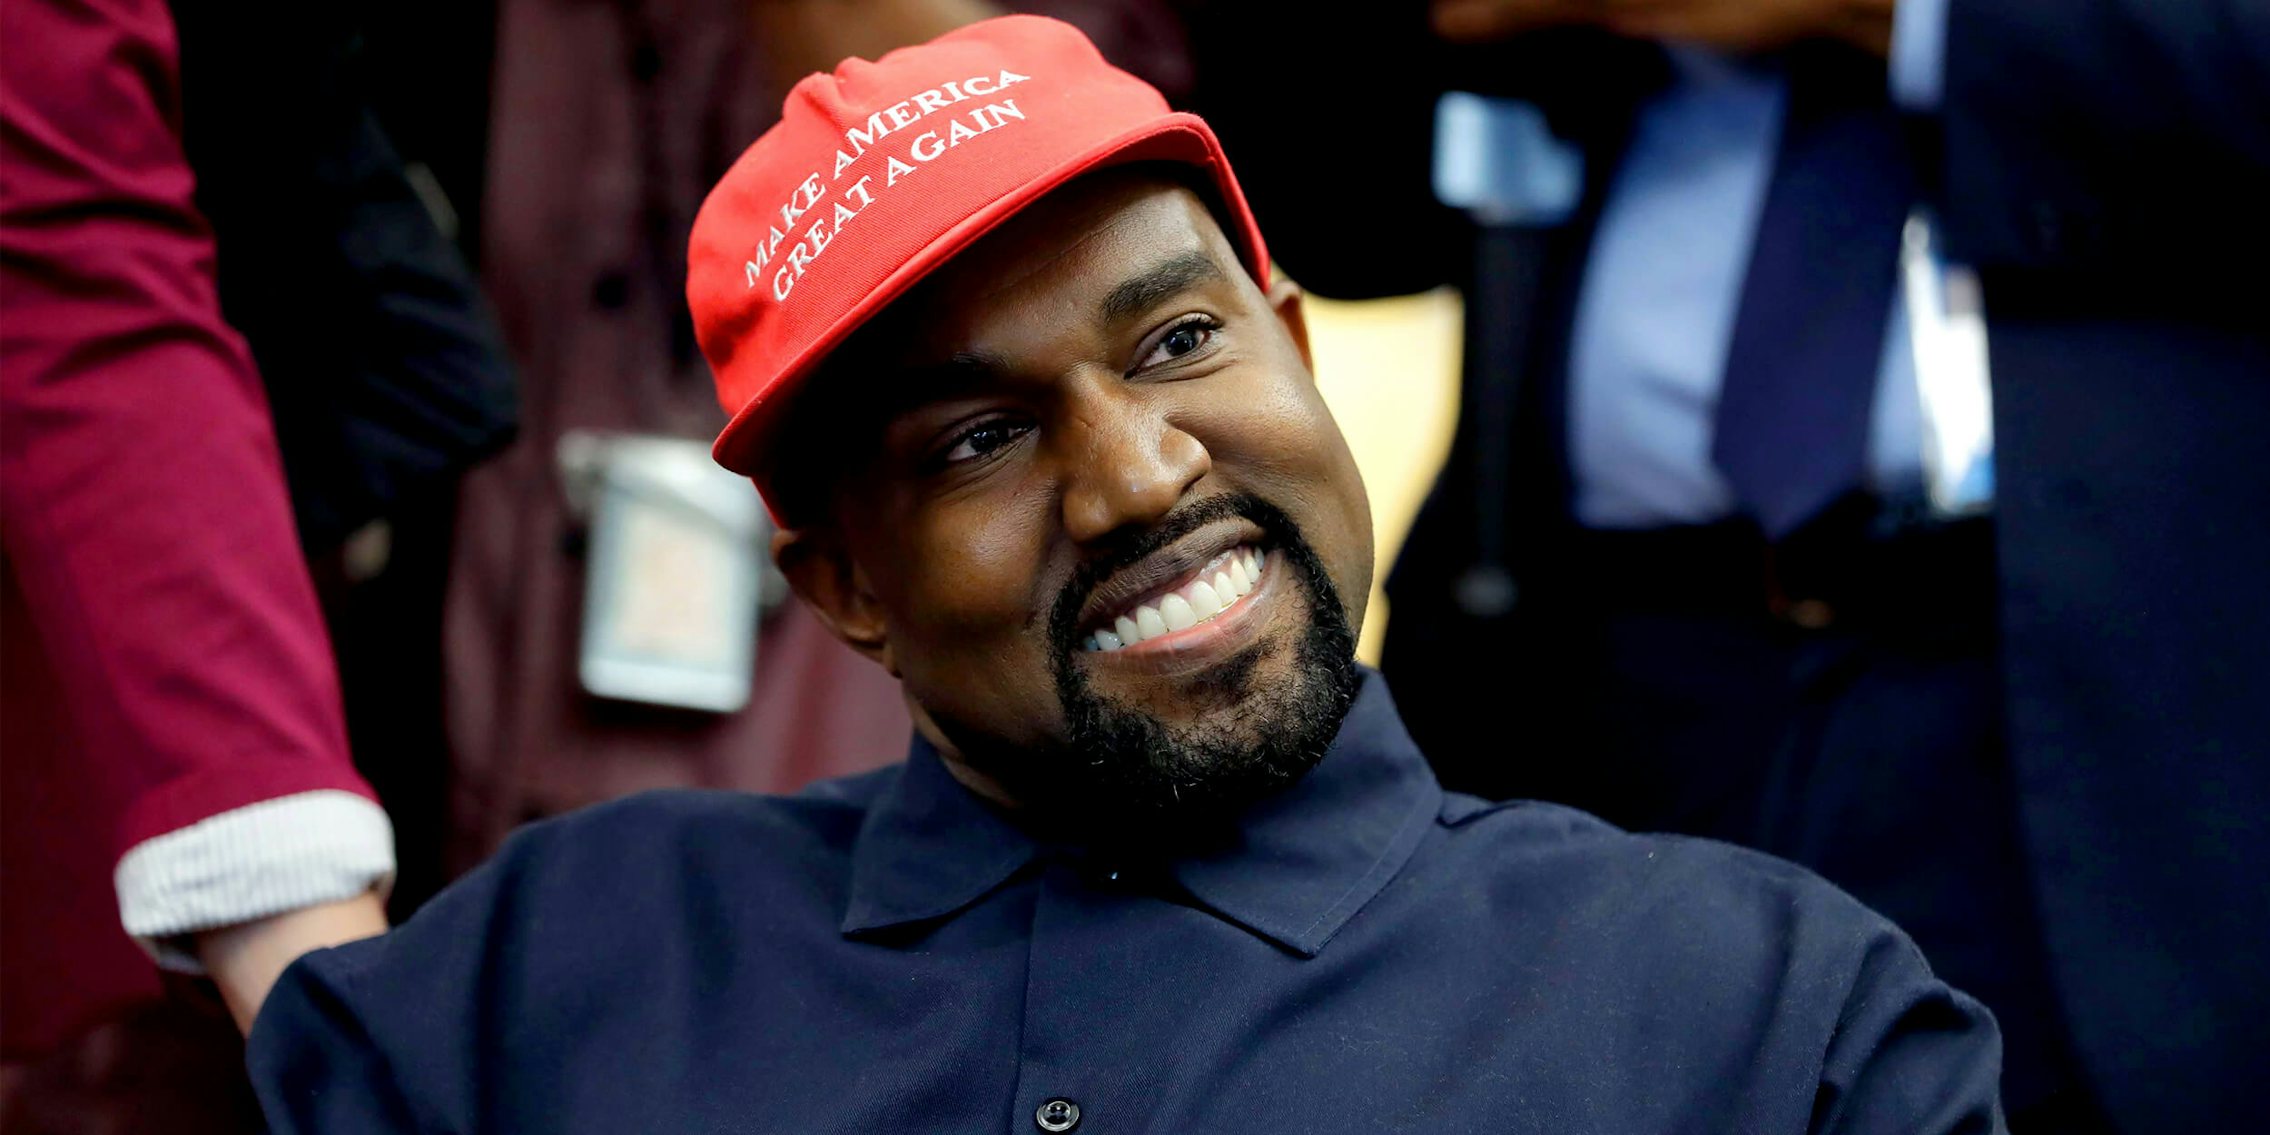 Kanye West smiling while wearing a Make America Great Again hat